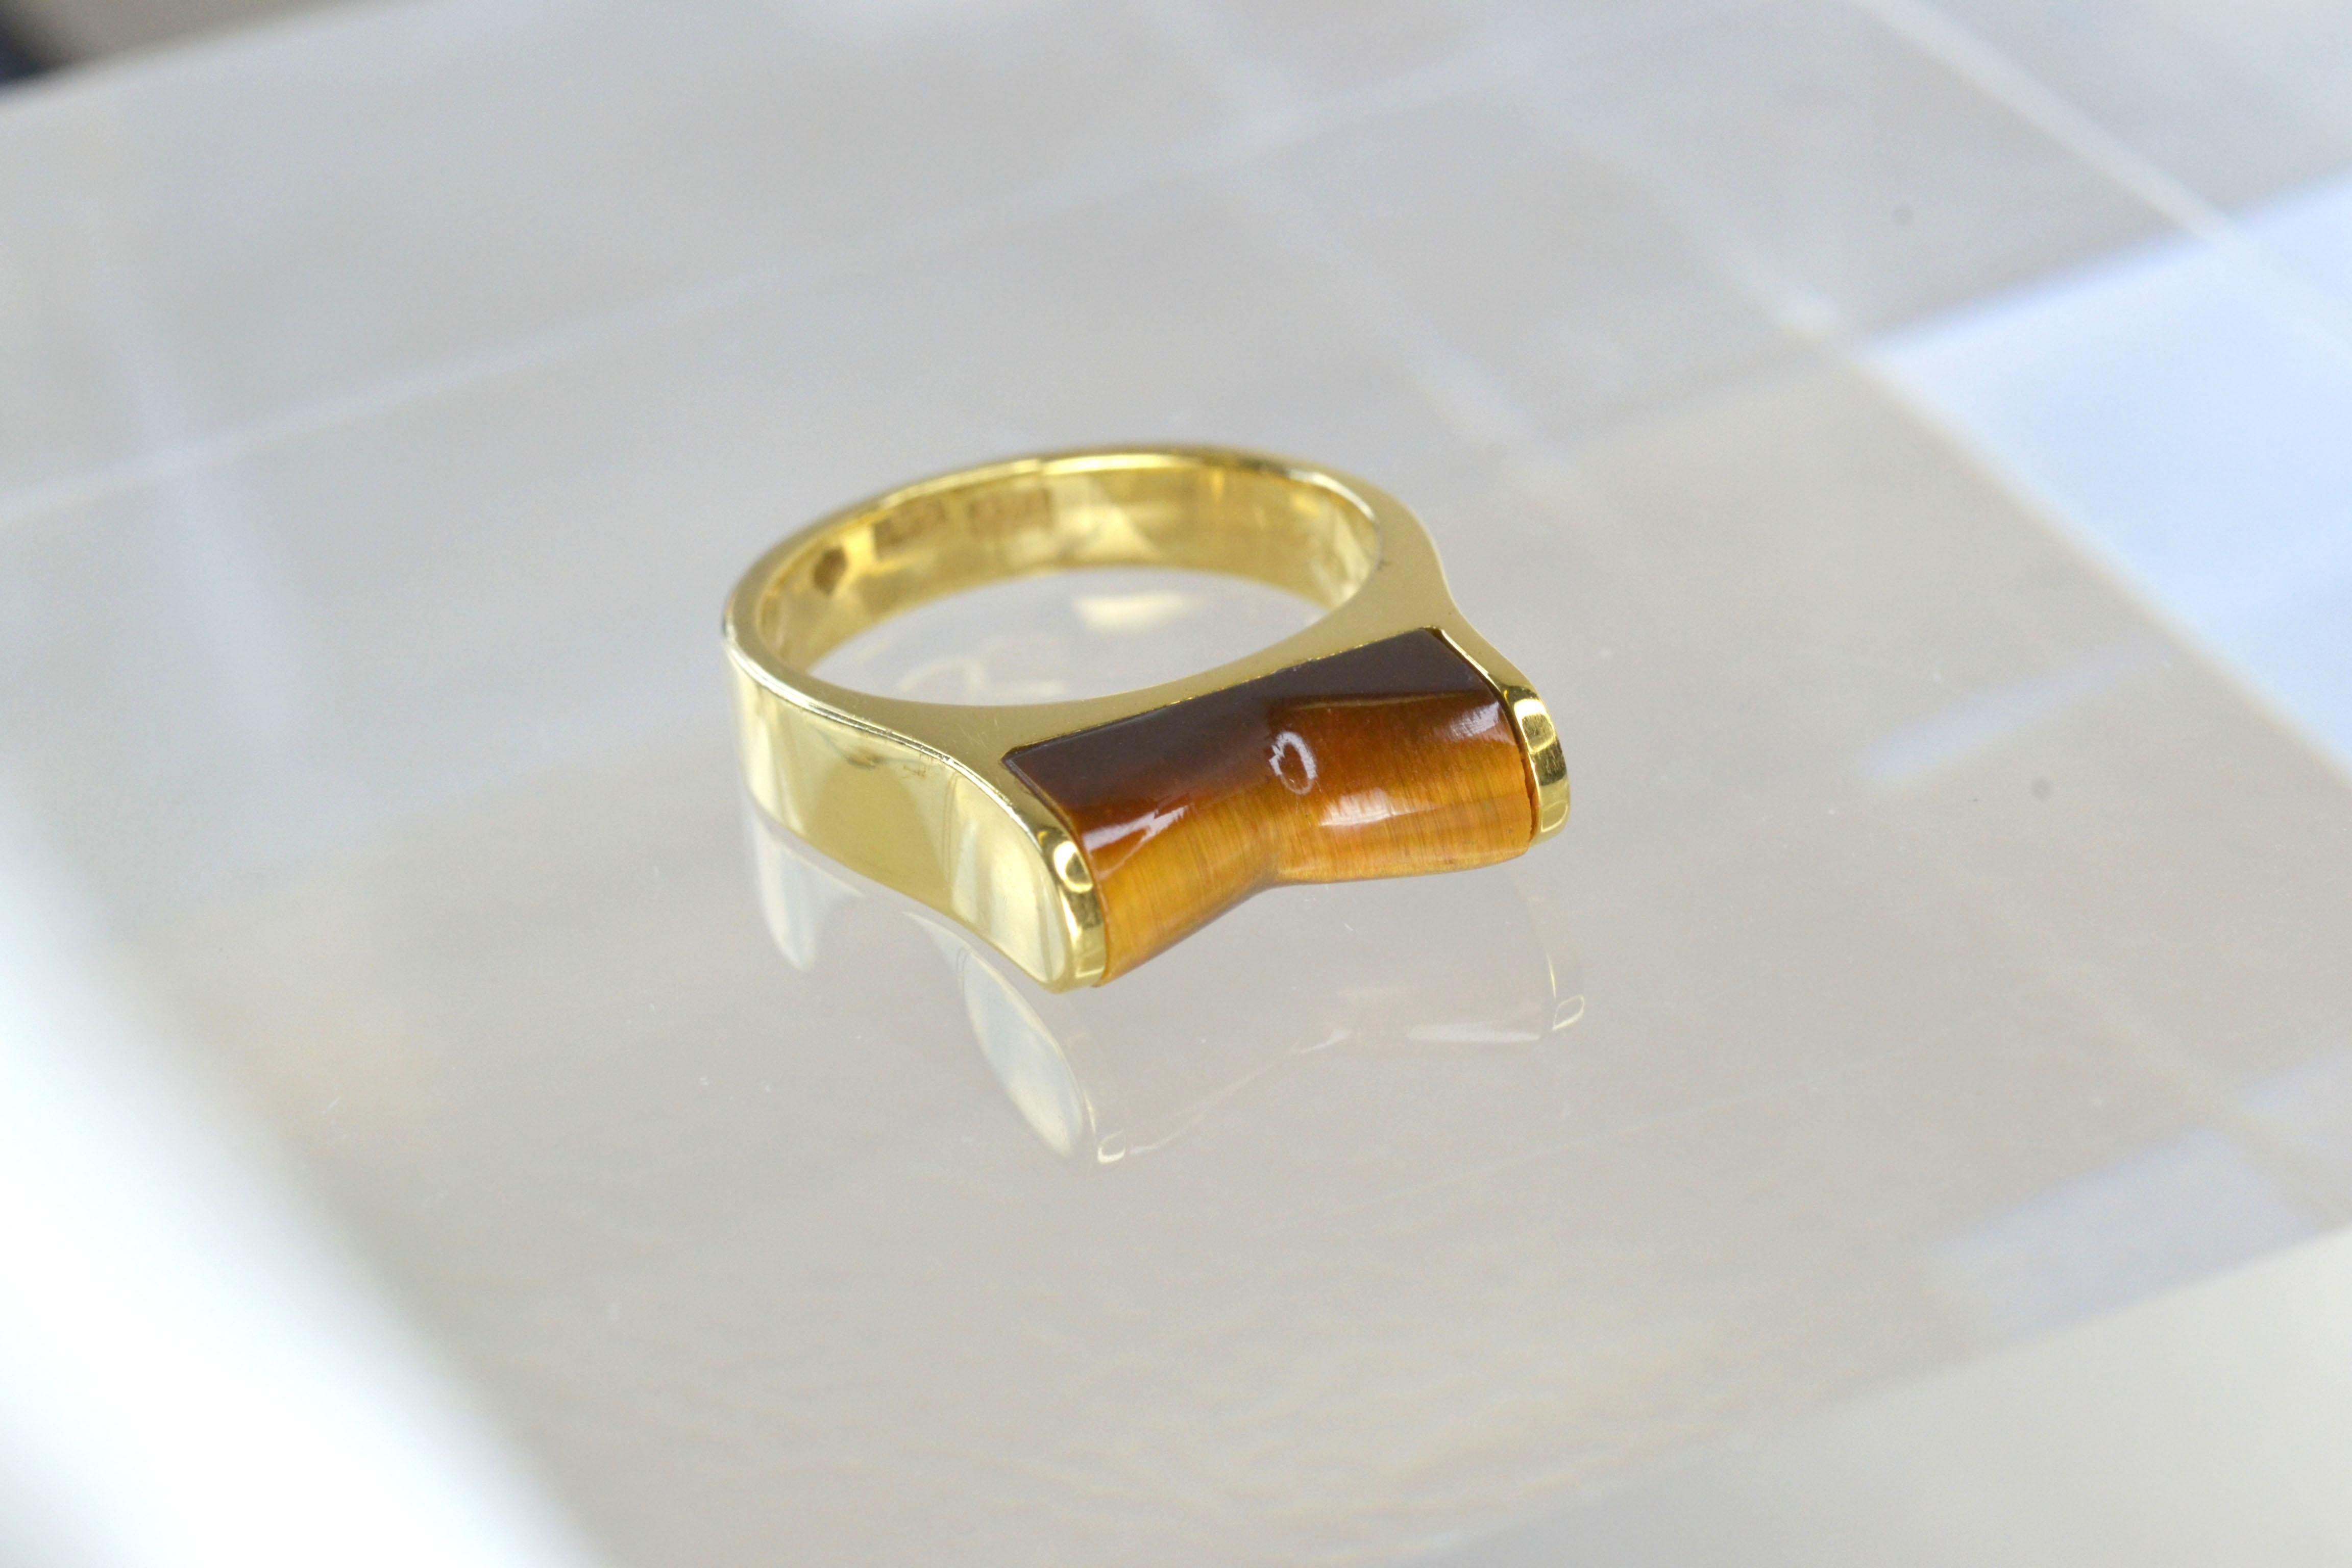 Revival Vintage 14k Gold Tiger's Eye Chevron Ring One-of-a-kind For Sale